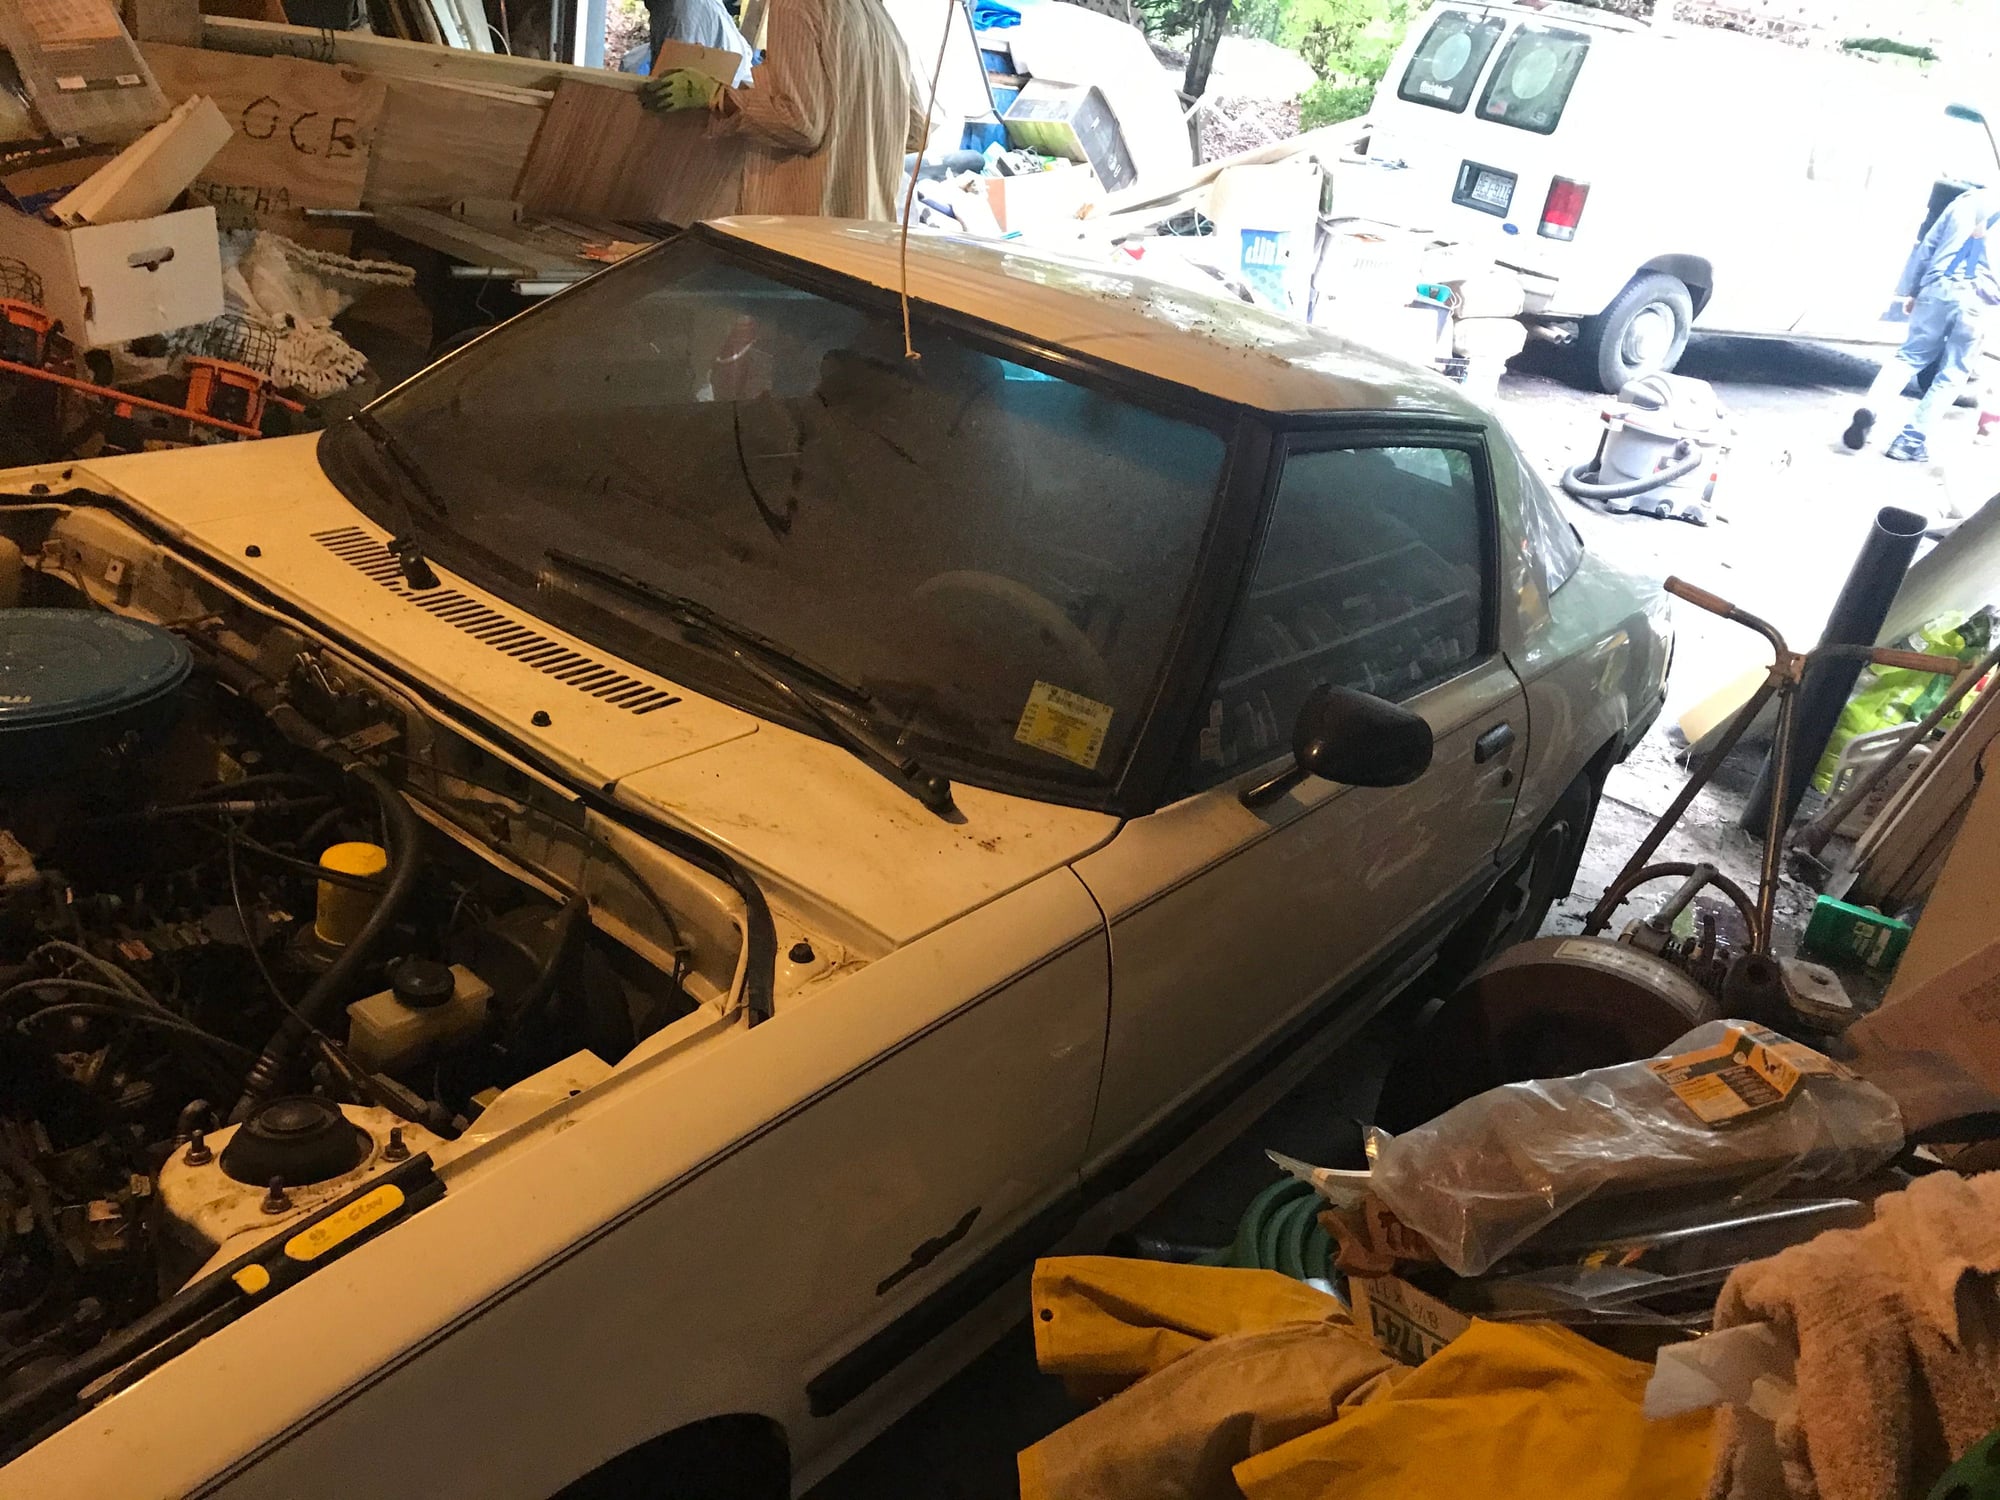 1985 Mazda RX-7 - 1985 Mazda RX7 GS Project Car - Used - VIN JM1F83312F085950C - 2WD - Automatic - Coupe - White - Raleigh, NC 80435, United States